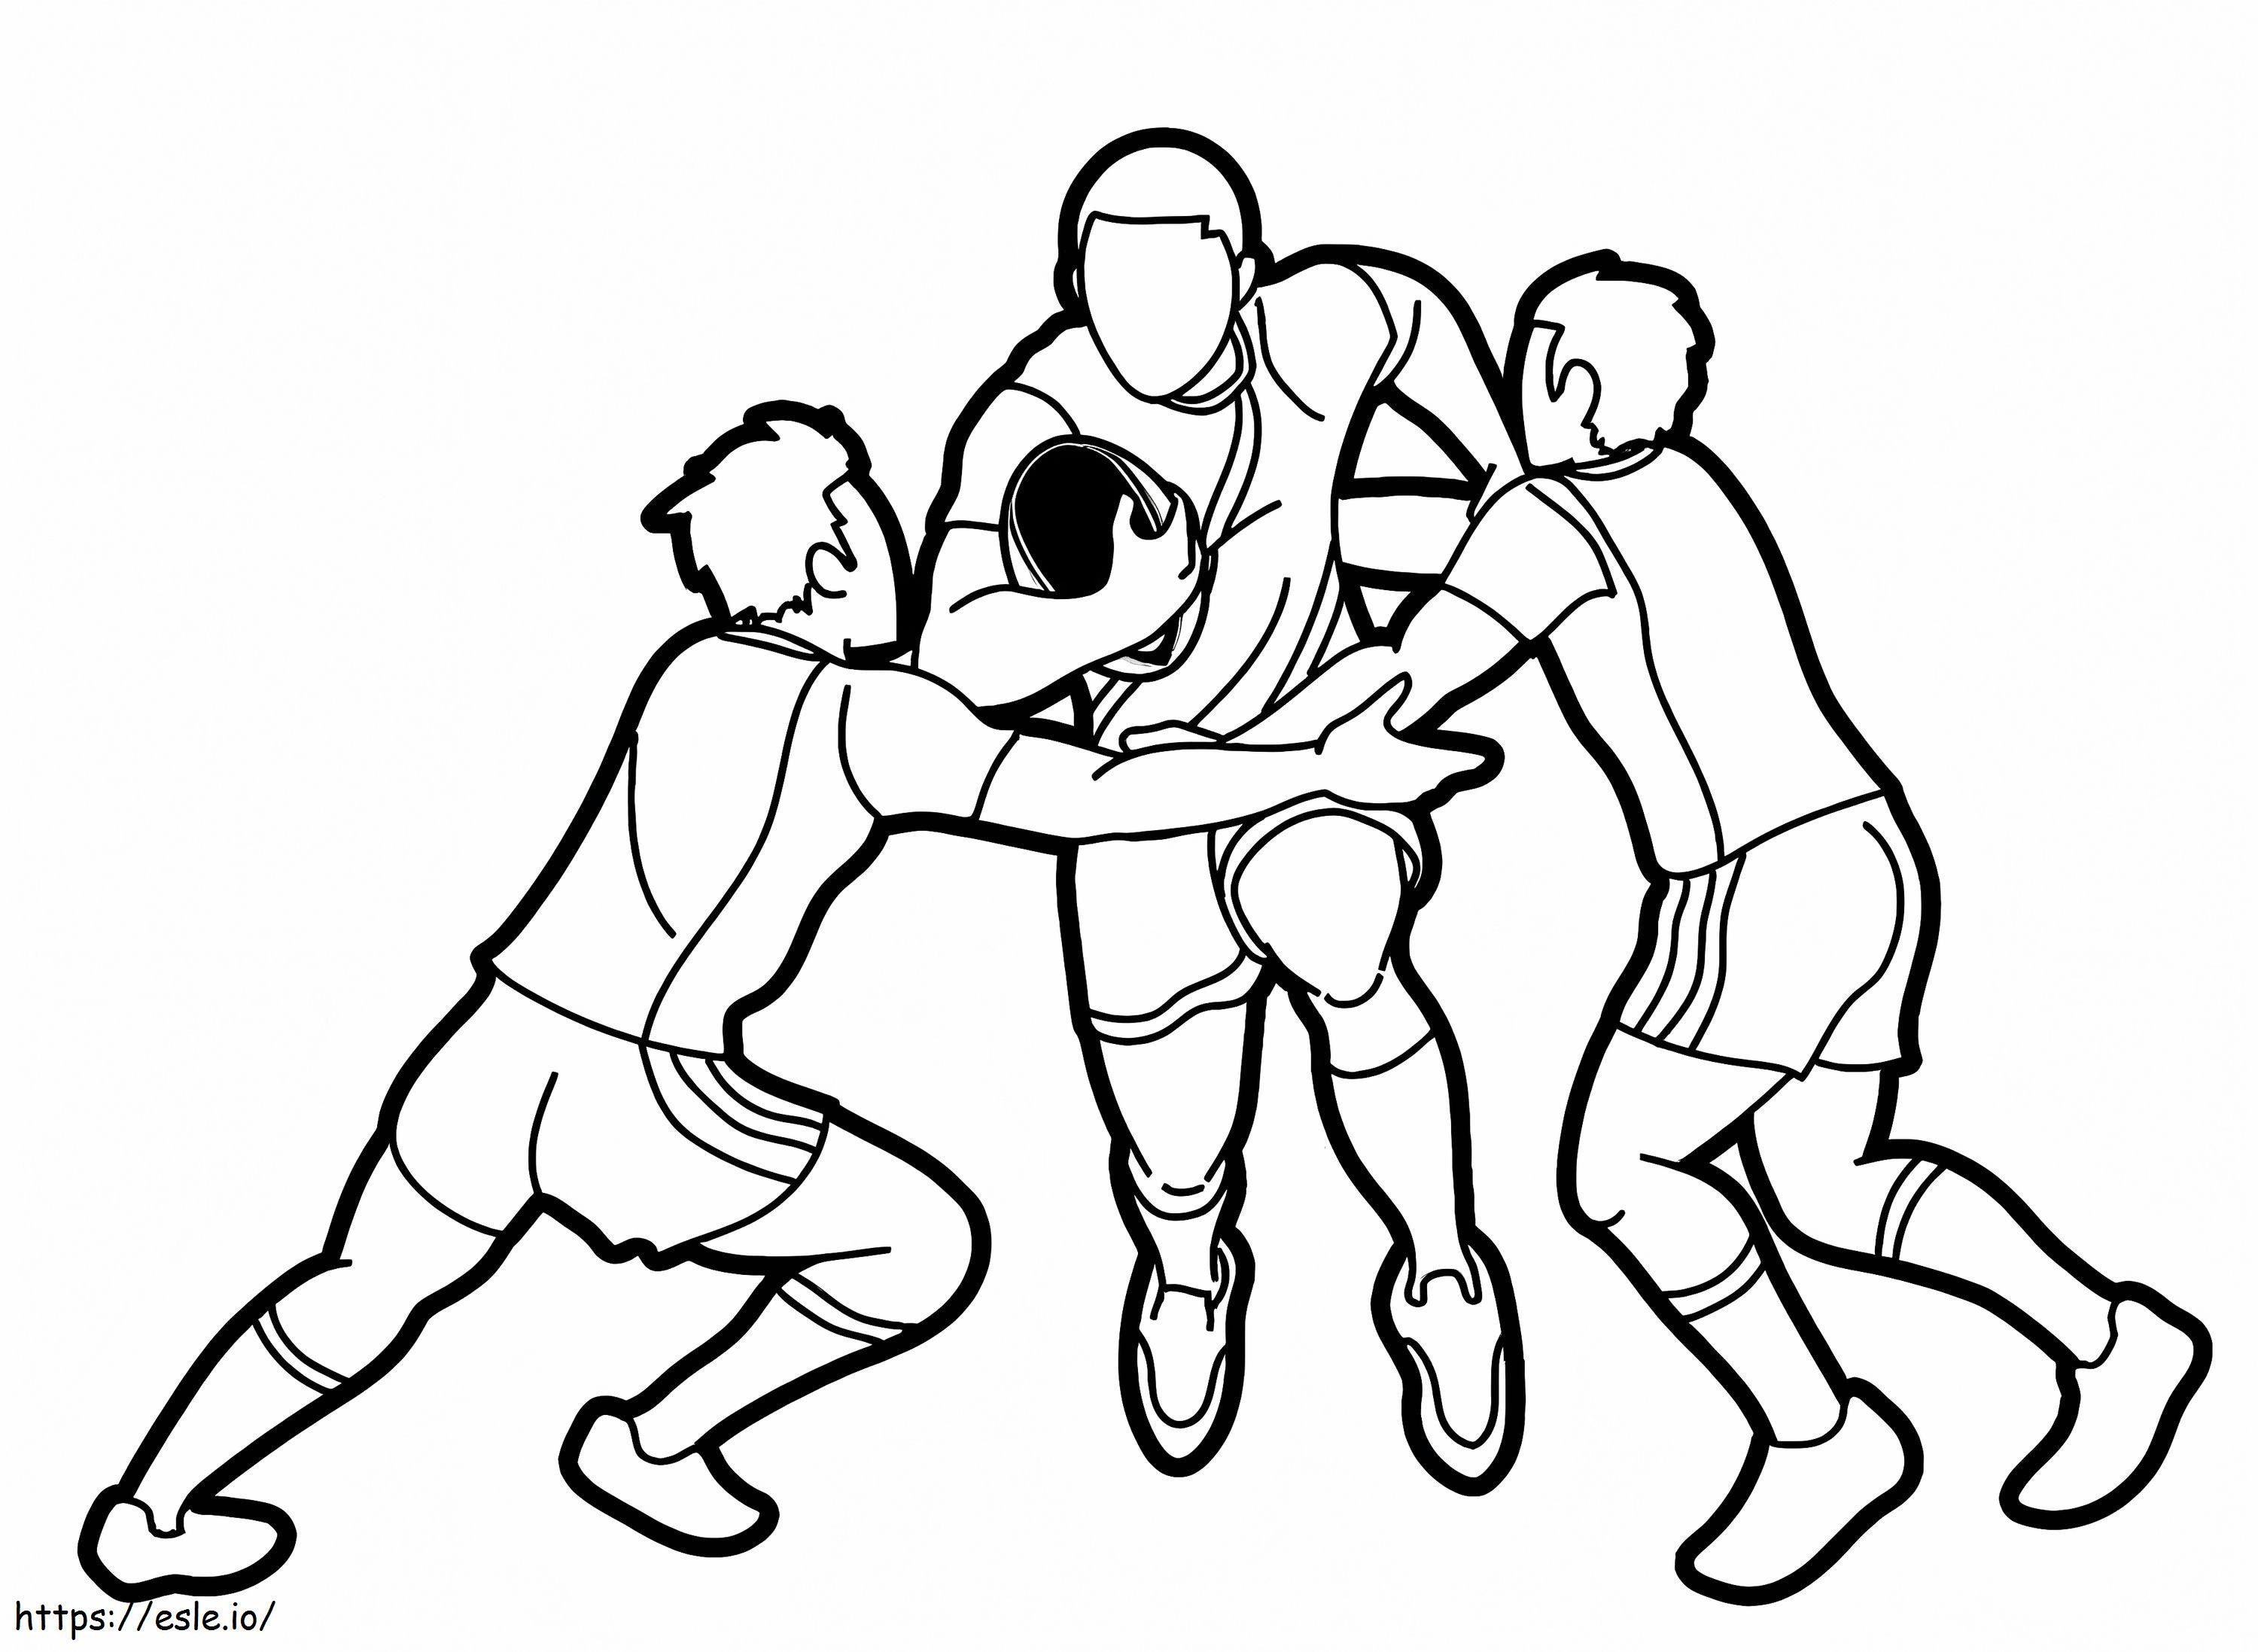 Printable Rugby Players coloring page